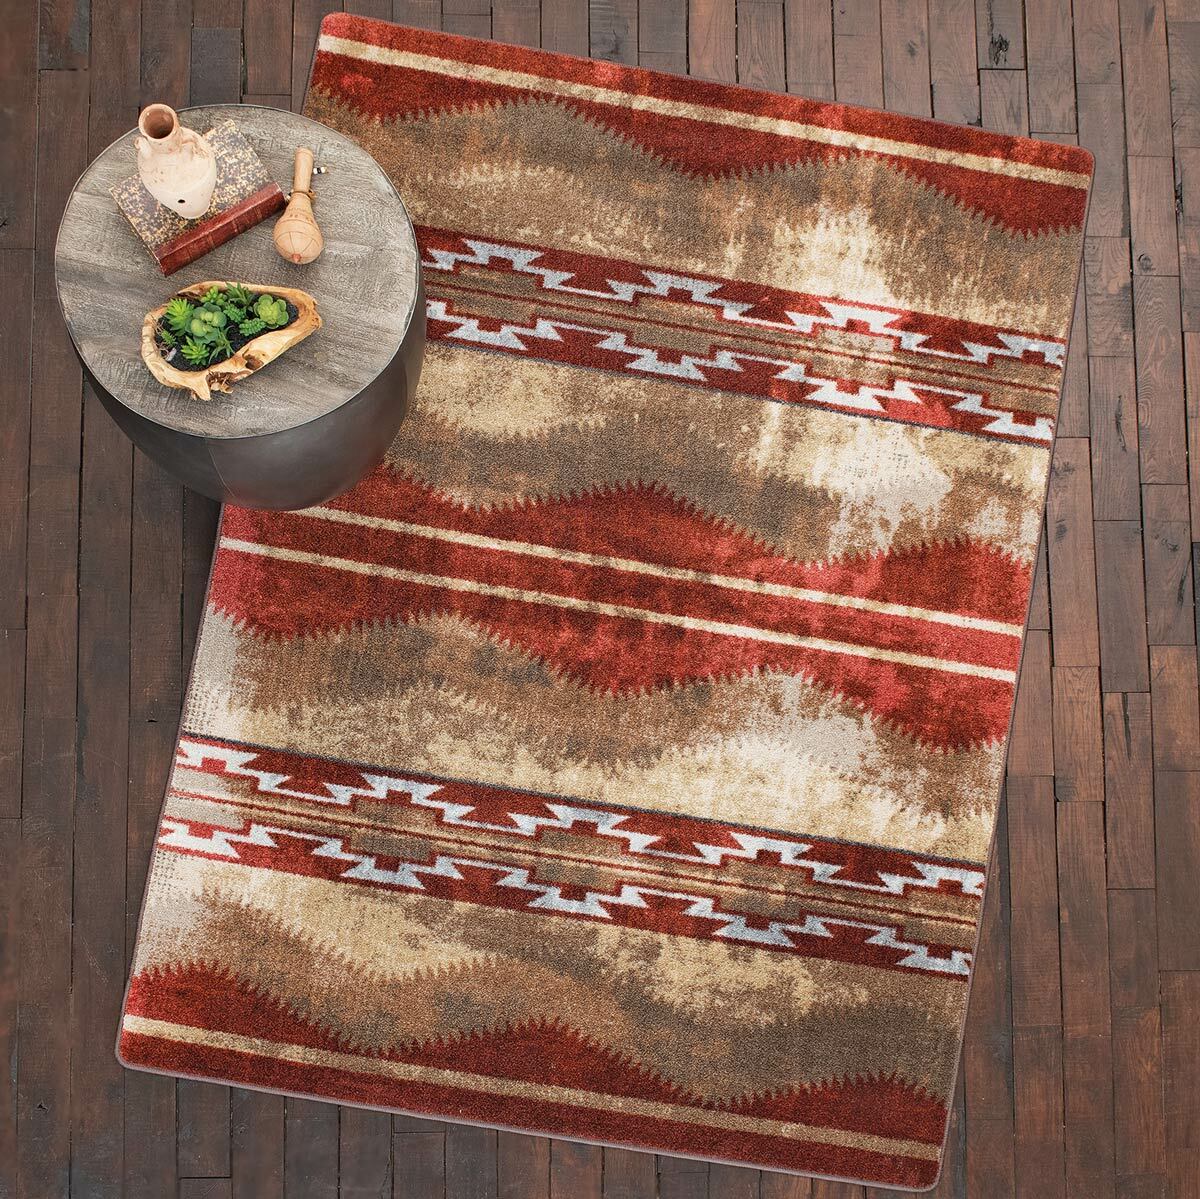 Red Canyon Natural Rug - 3 x 4, Black Forest Decor